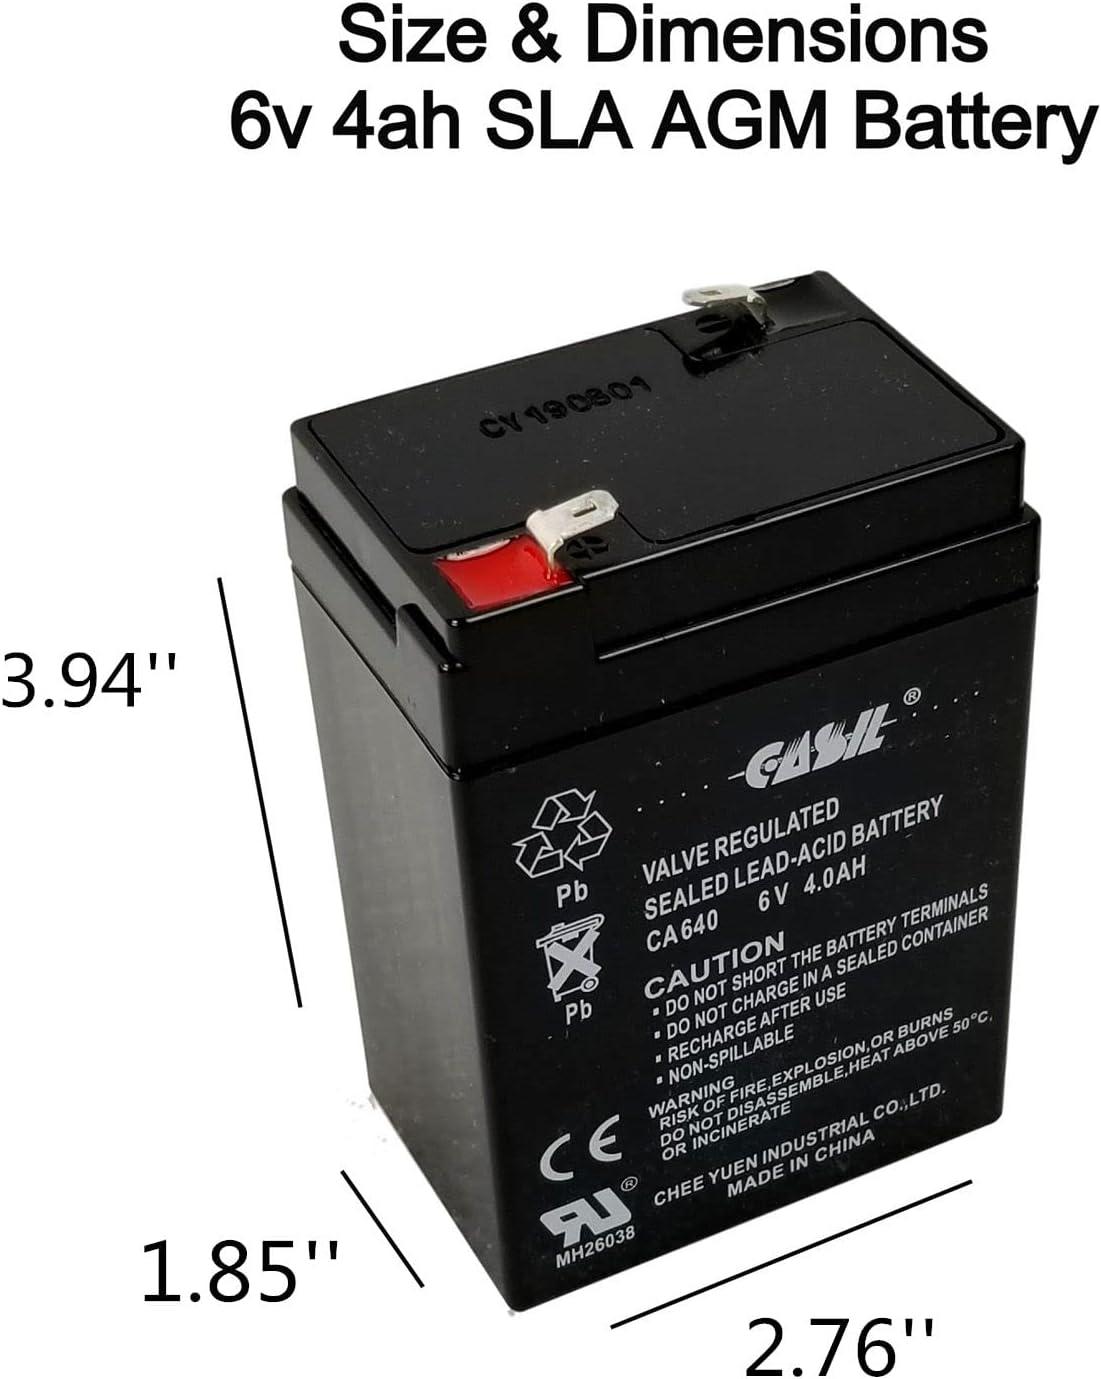 Rechargeable Battery 6 Volt Torch Battery Sealed Lead Acid 4.5AH 6V 4.0